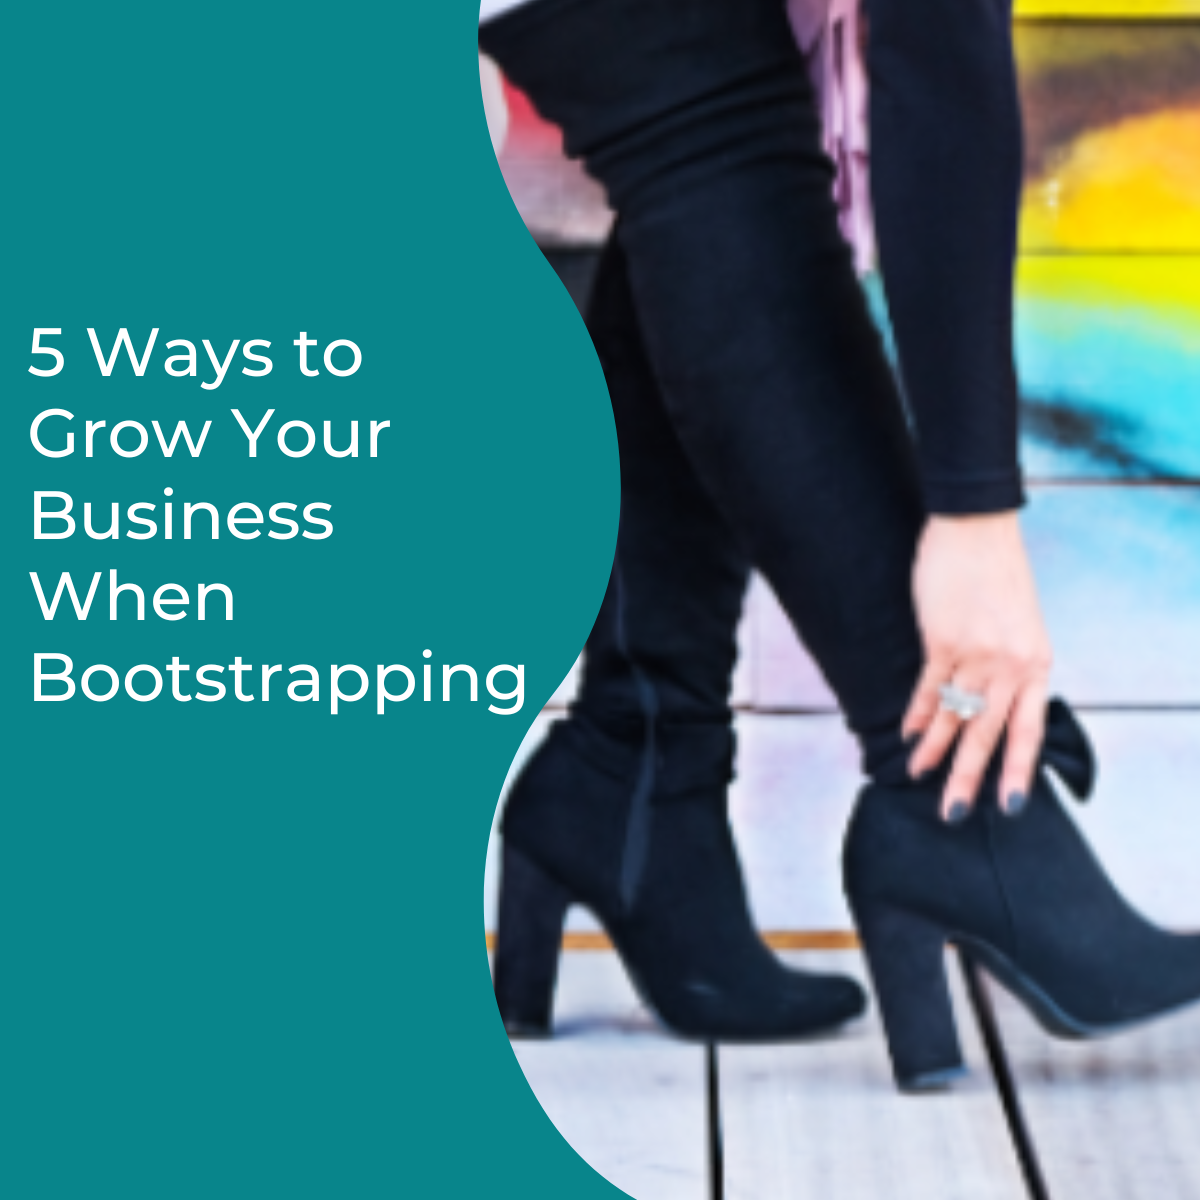 5 Ways to Grow Your Business When Bootstrapping